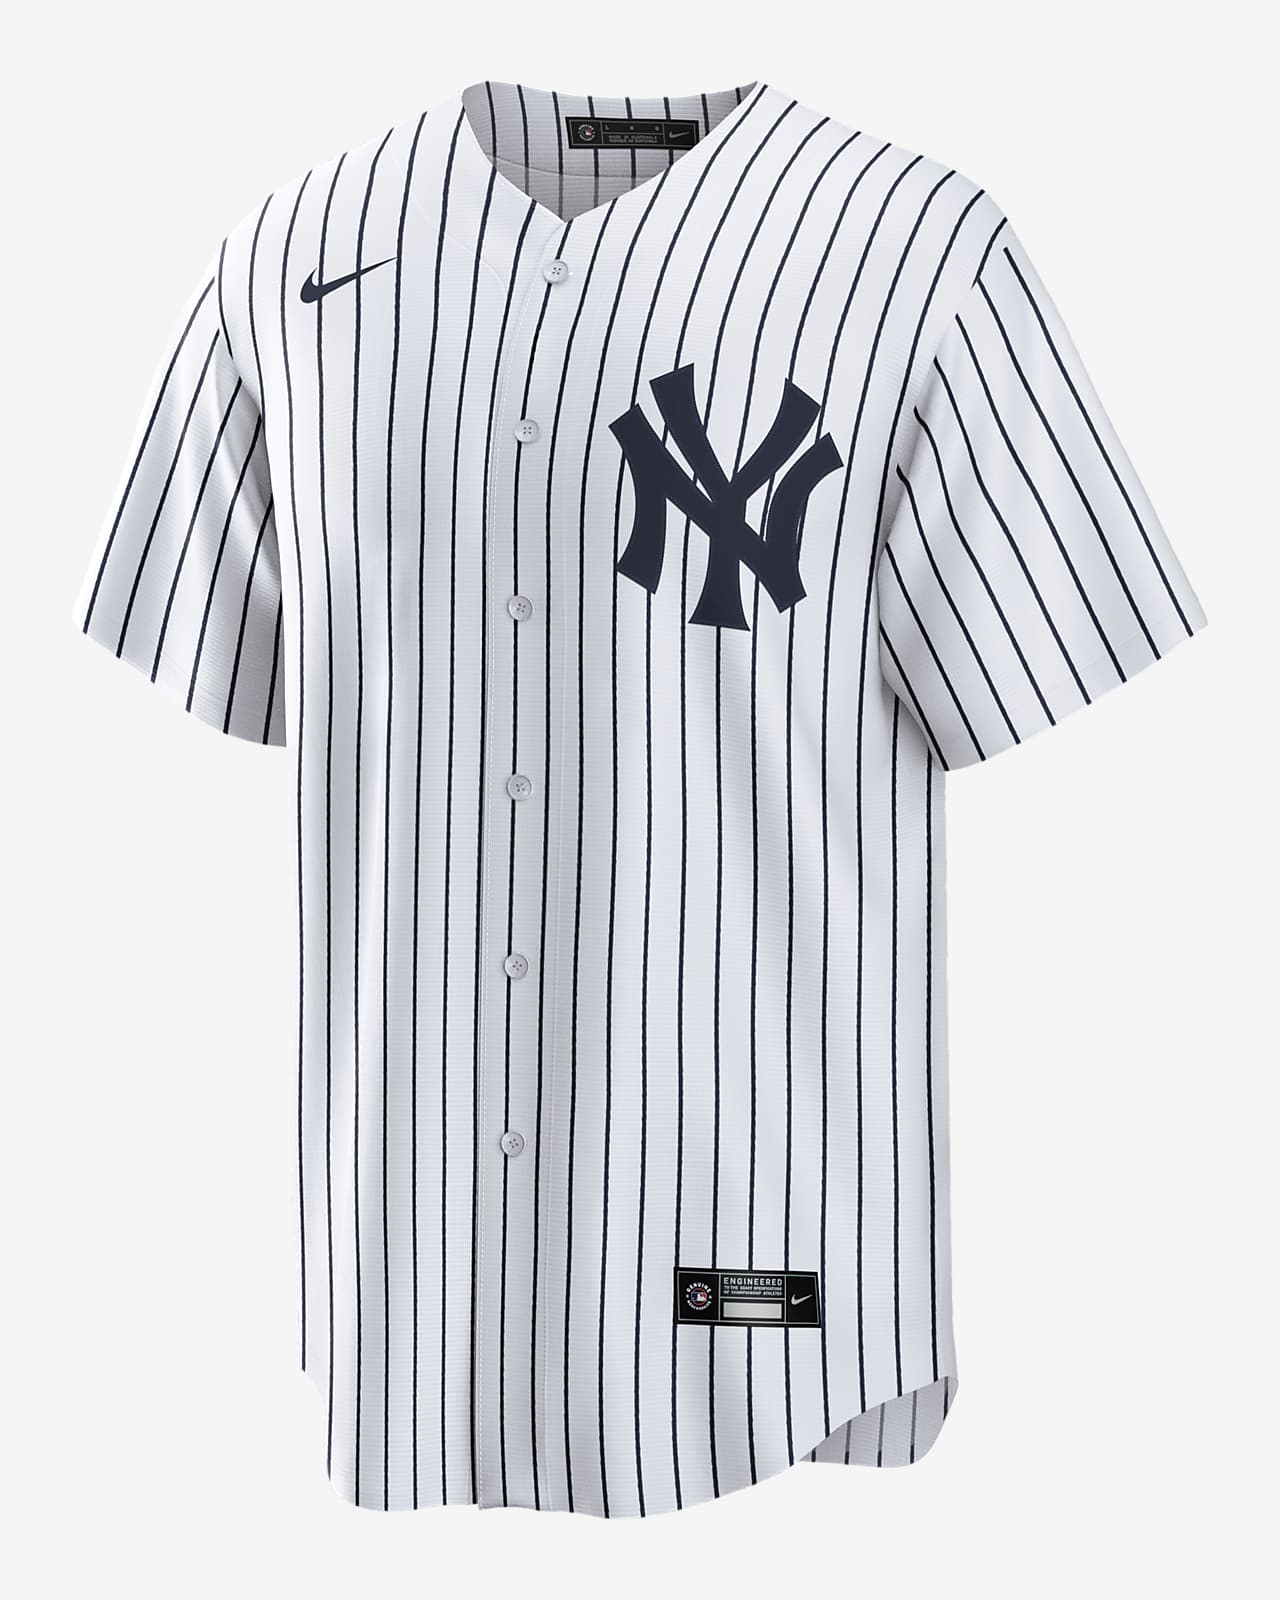 yankees cycling jersey